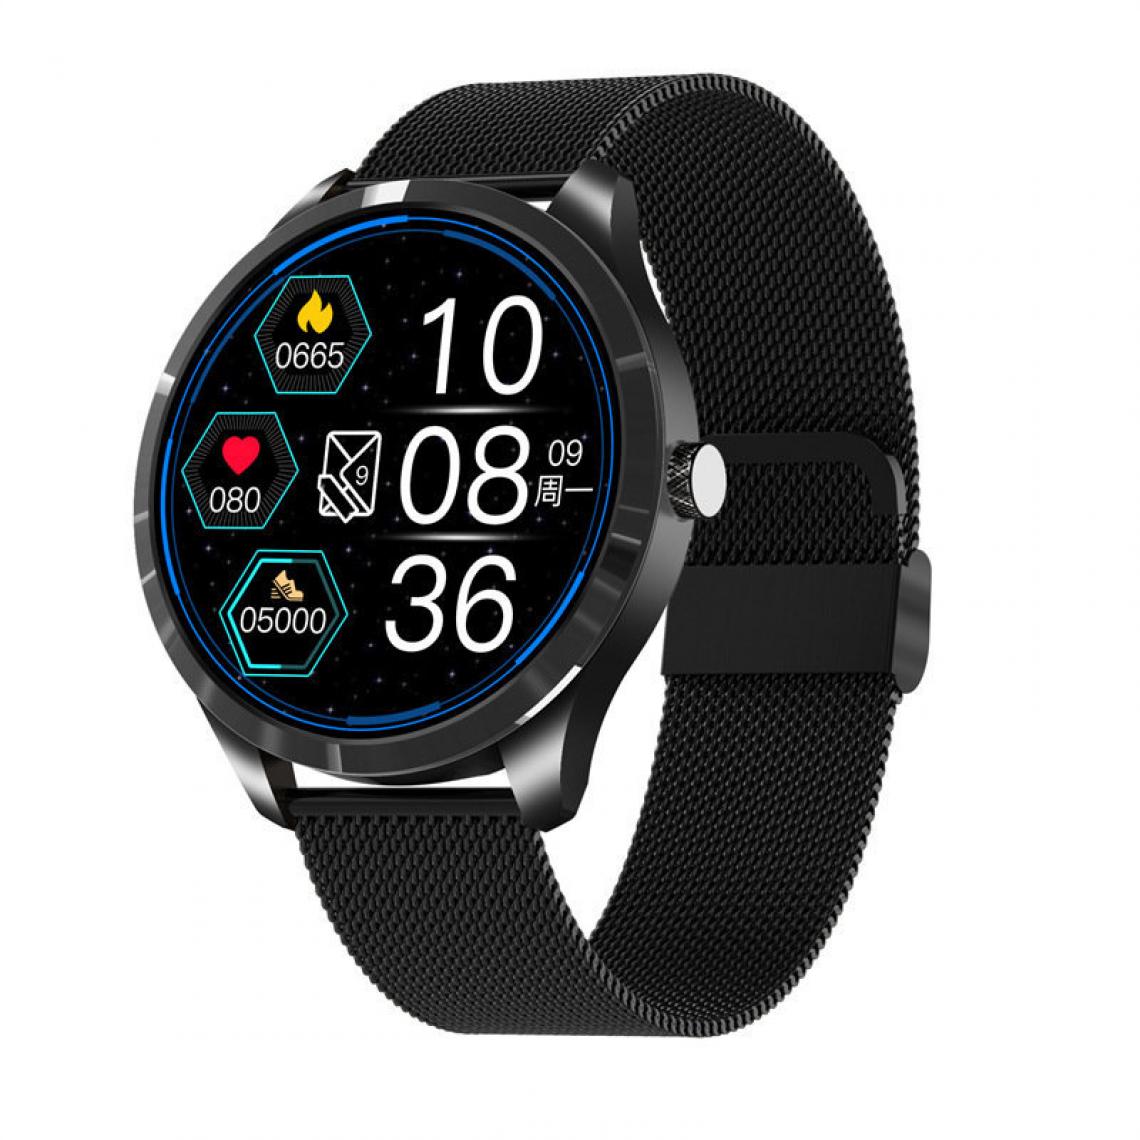 Chronotech Montres - Chronus Smart Watch 1.28 inch Screen Waterproof Bluetooth 5.0 Fitness Trackers with Heart Rate,Message reminder,Blood Oxygen, Sleep Supervising(black) - Montre connectée